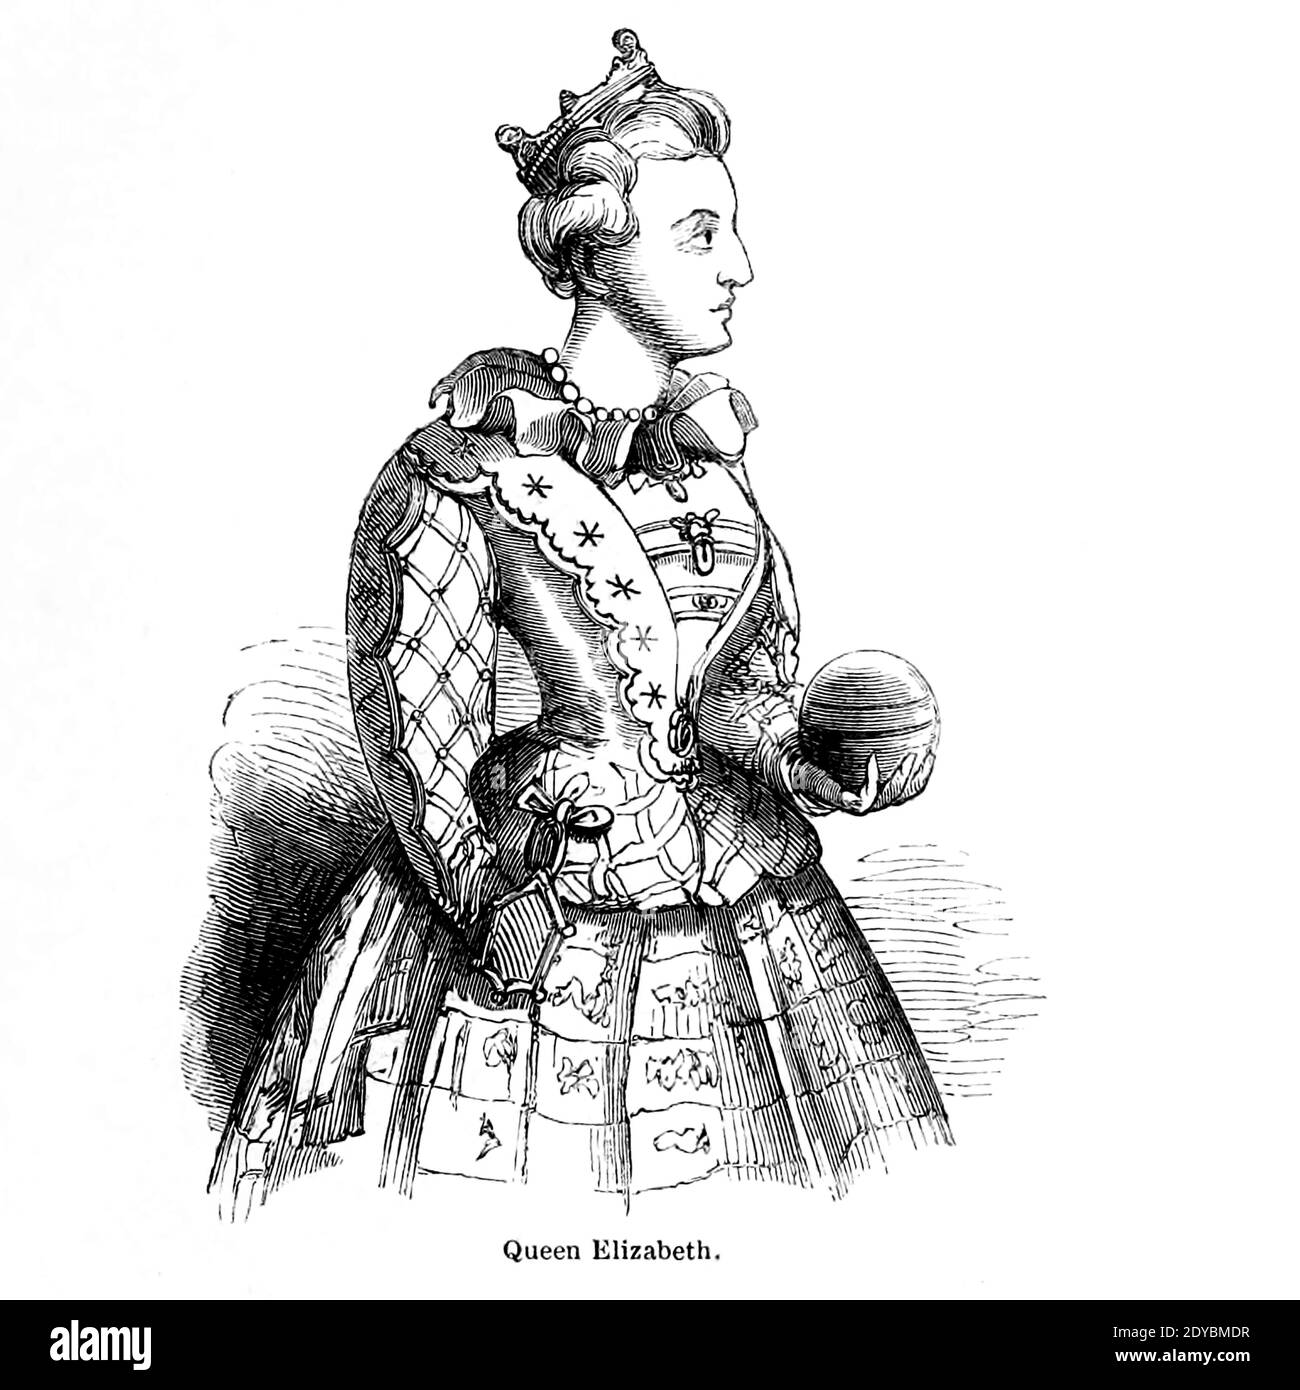 Queen Elizabeth From the book The wanderings of a pen and pencil by Palmer, F. P. (Francis Paul); Illustrated by Crowquill, Alfred, [Alfred Henry Forrester]  Published in London by Jeremiah How in 1846 Stock Photo